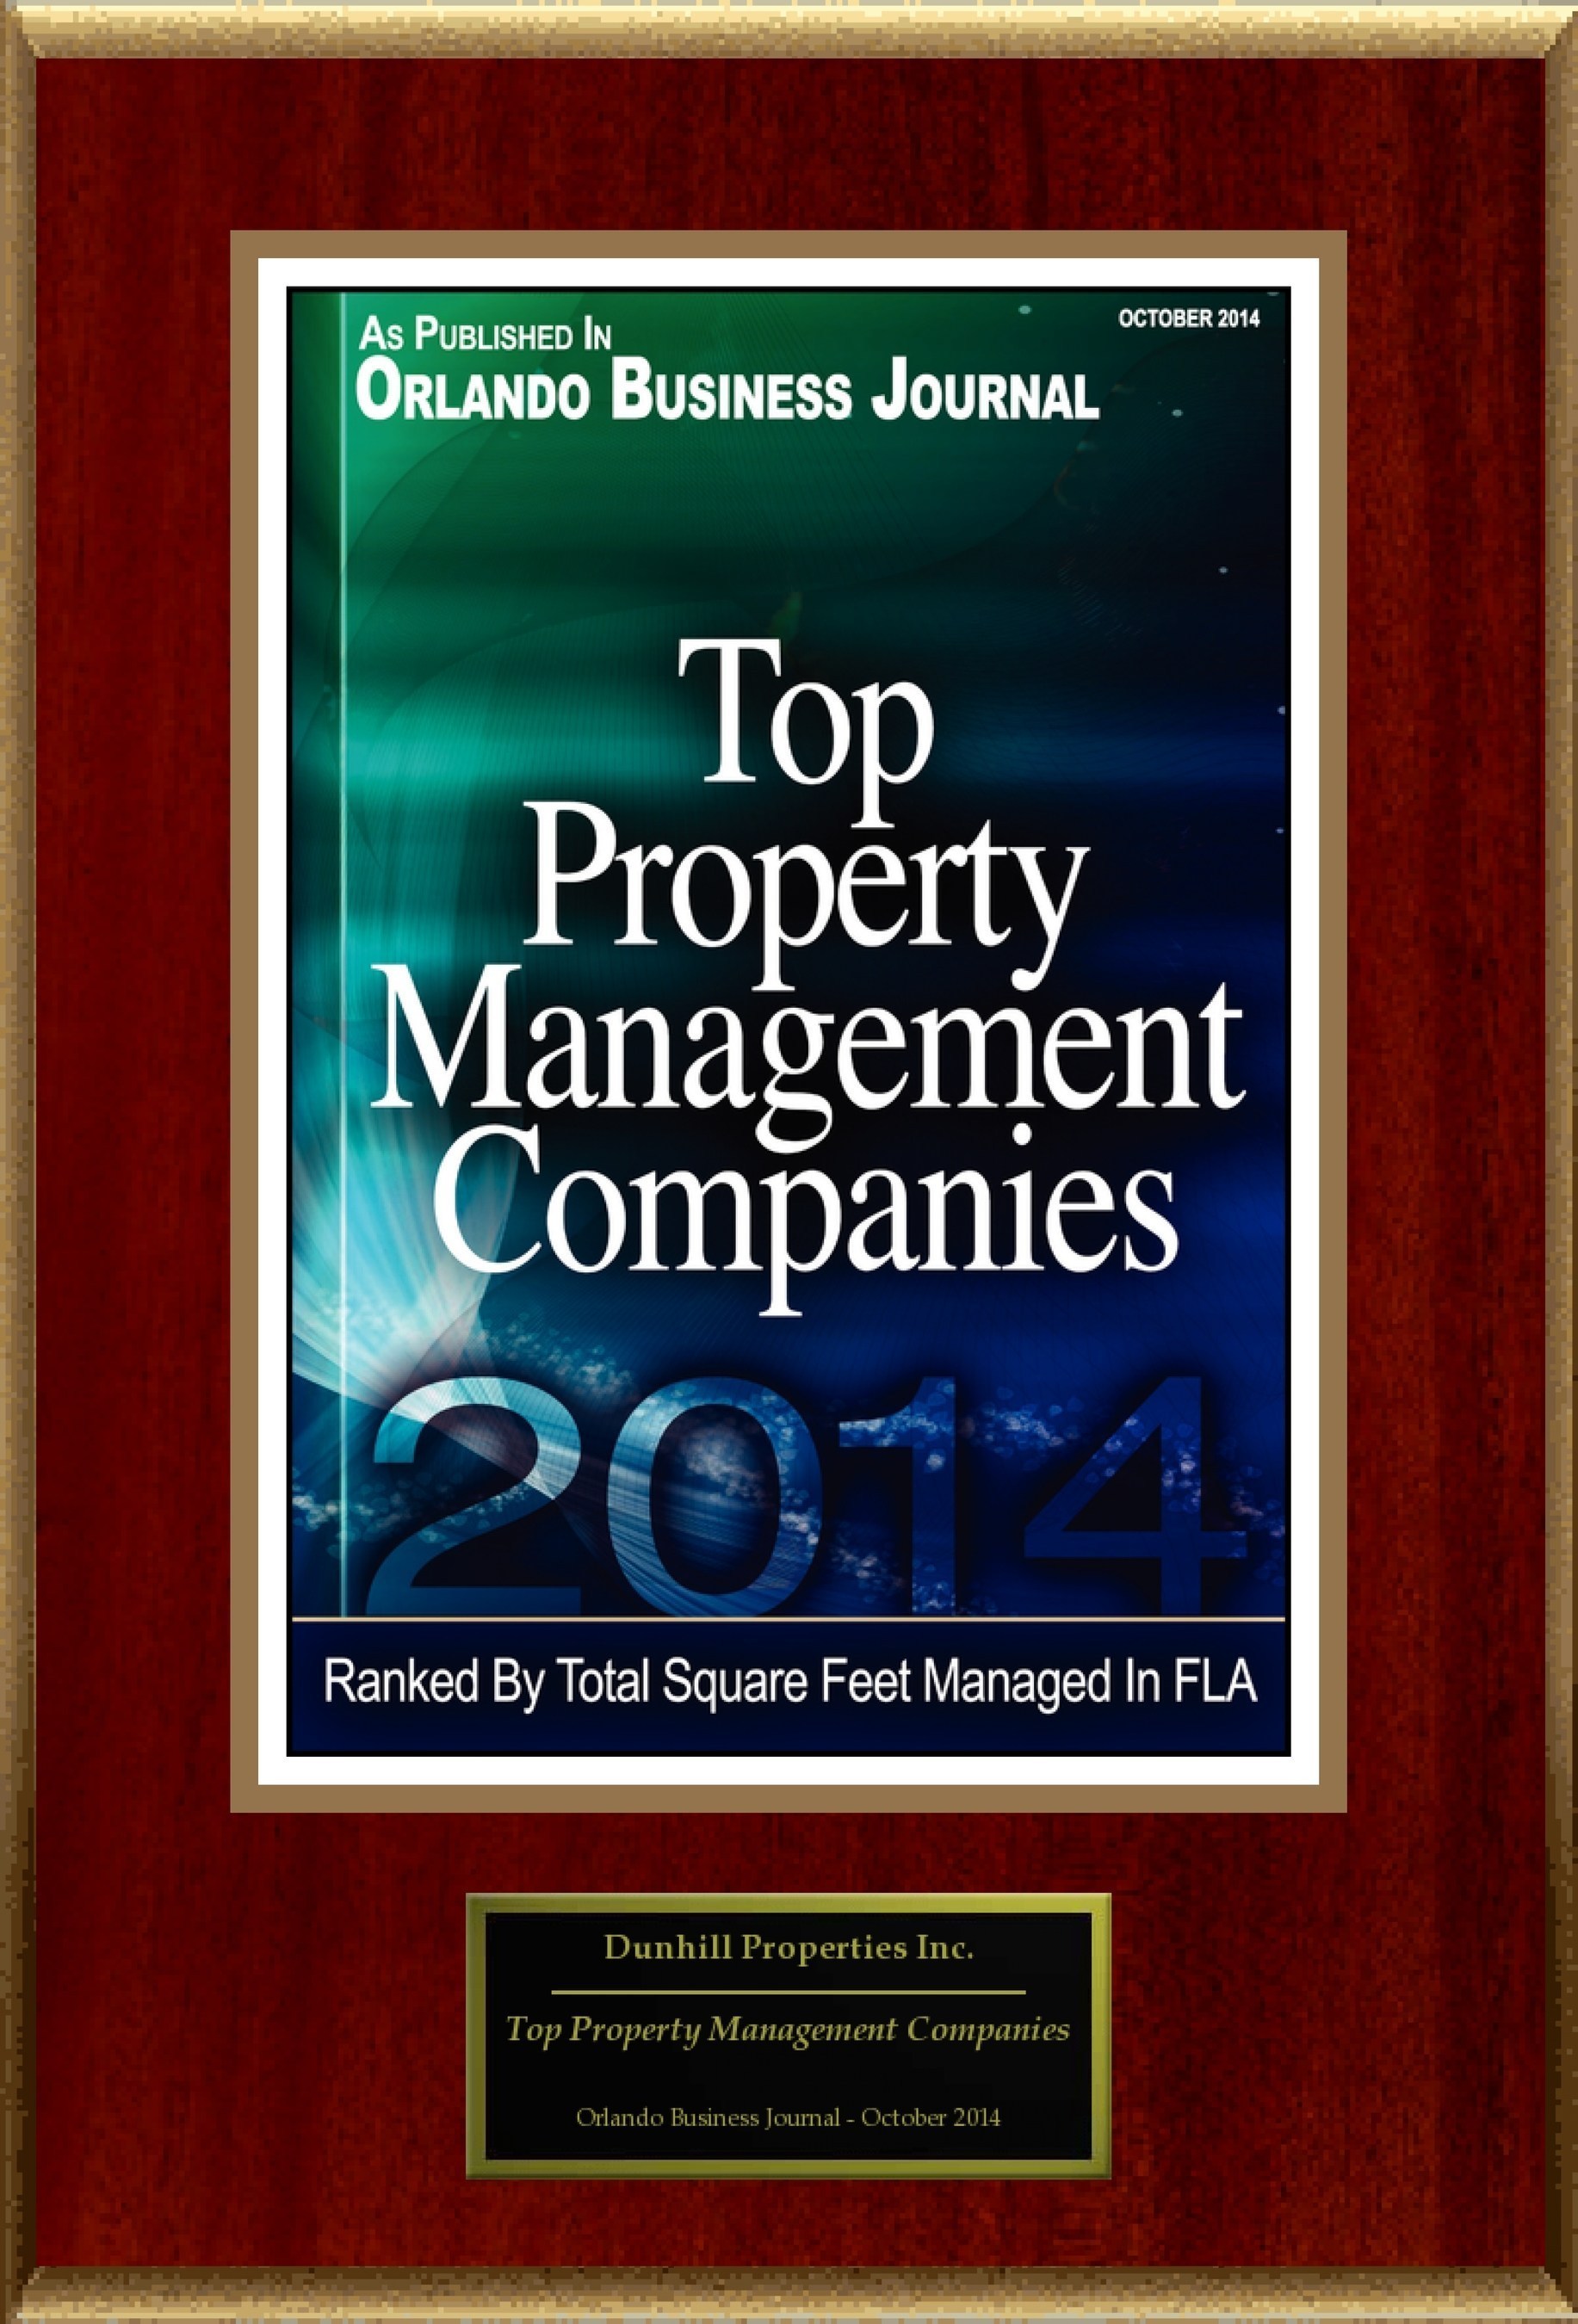 Dunhill Properties Inc. Selected For "Top Property Management Companies